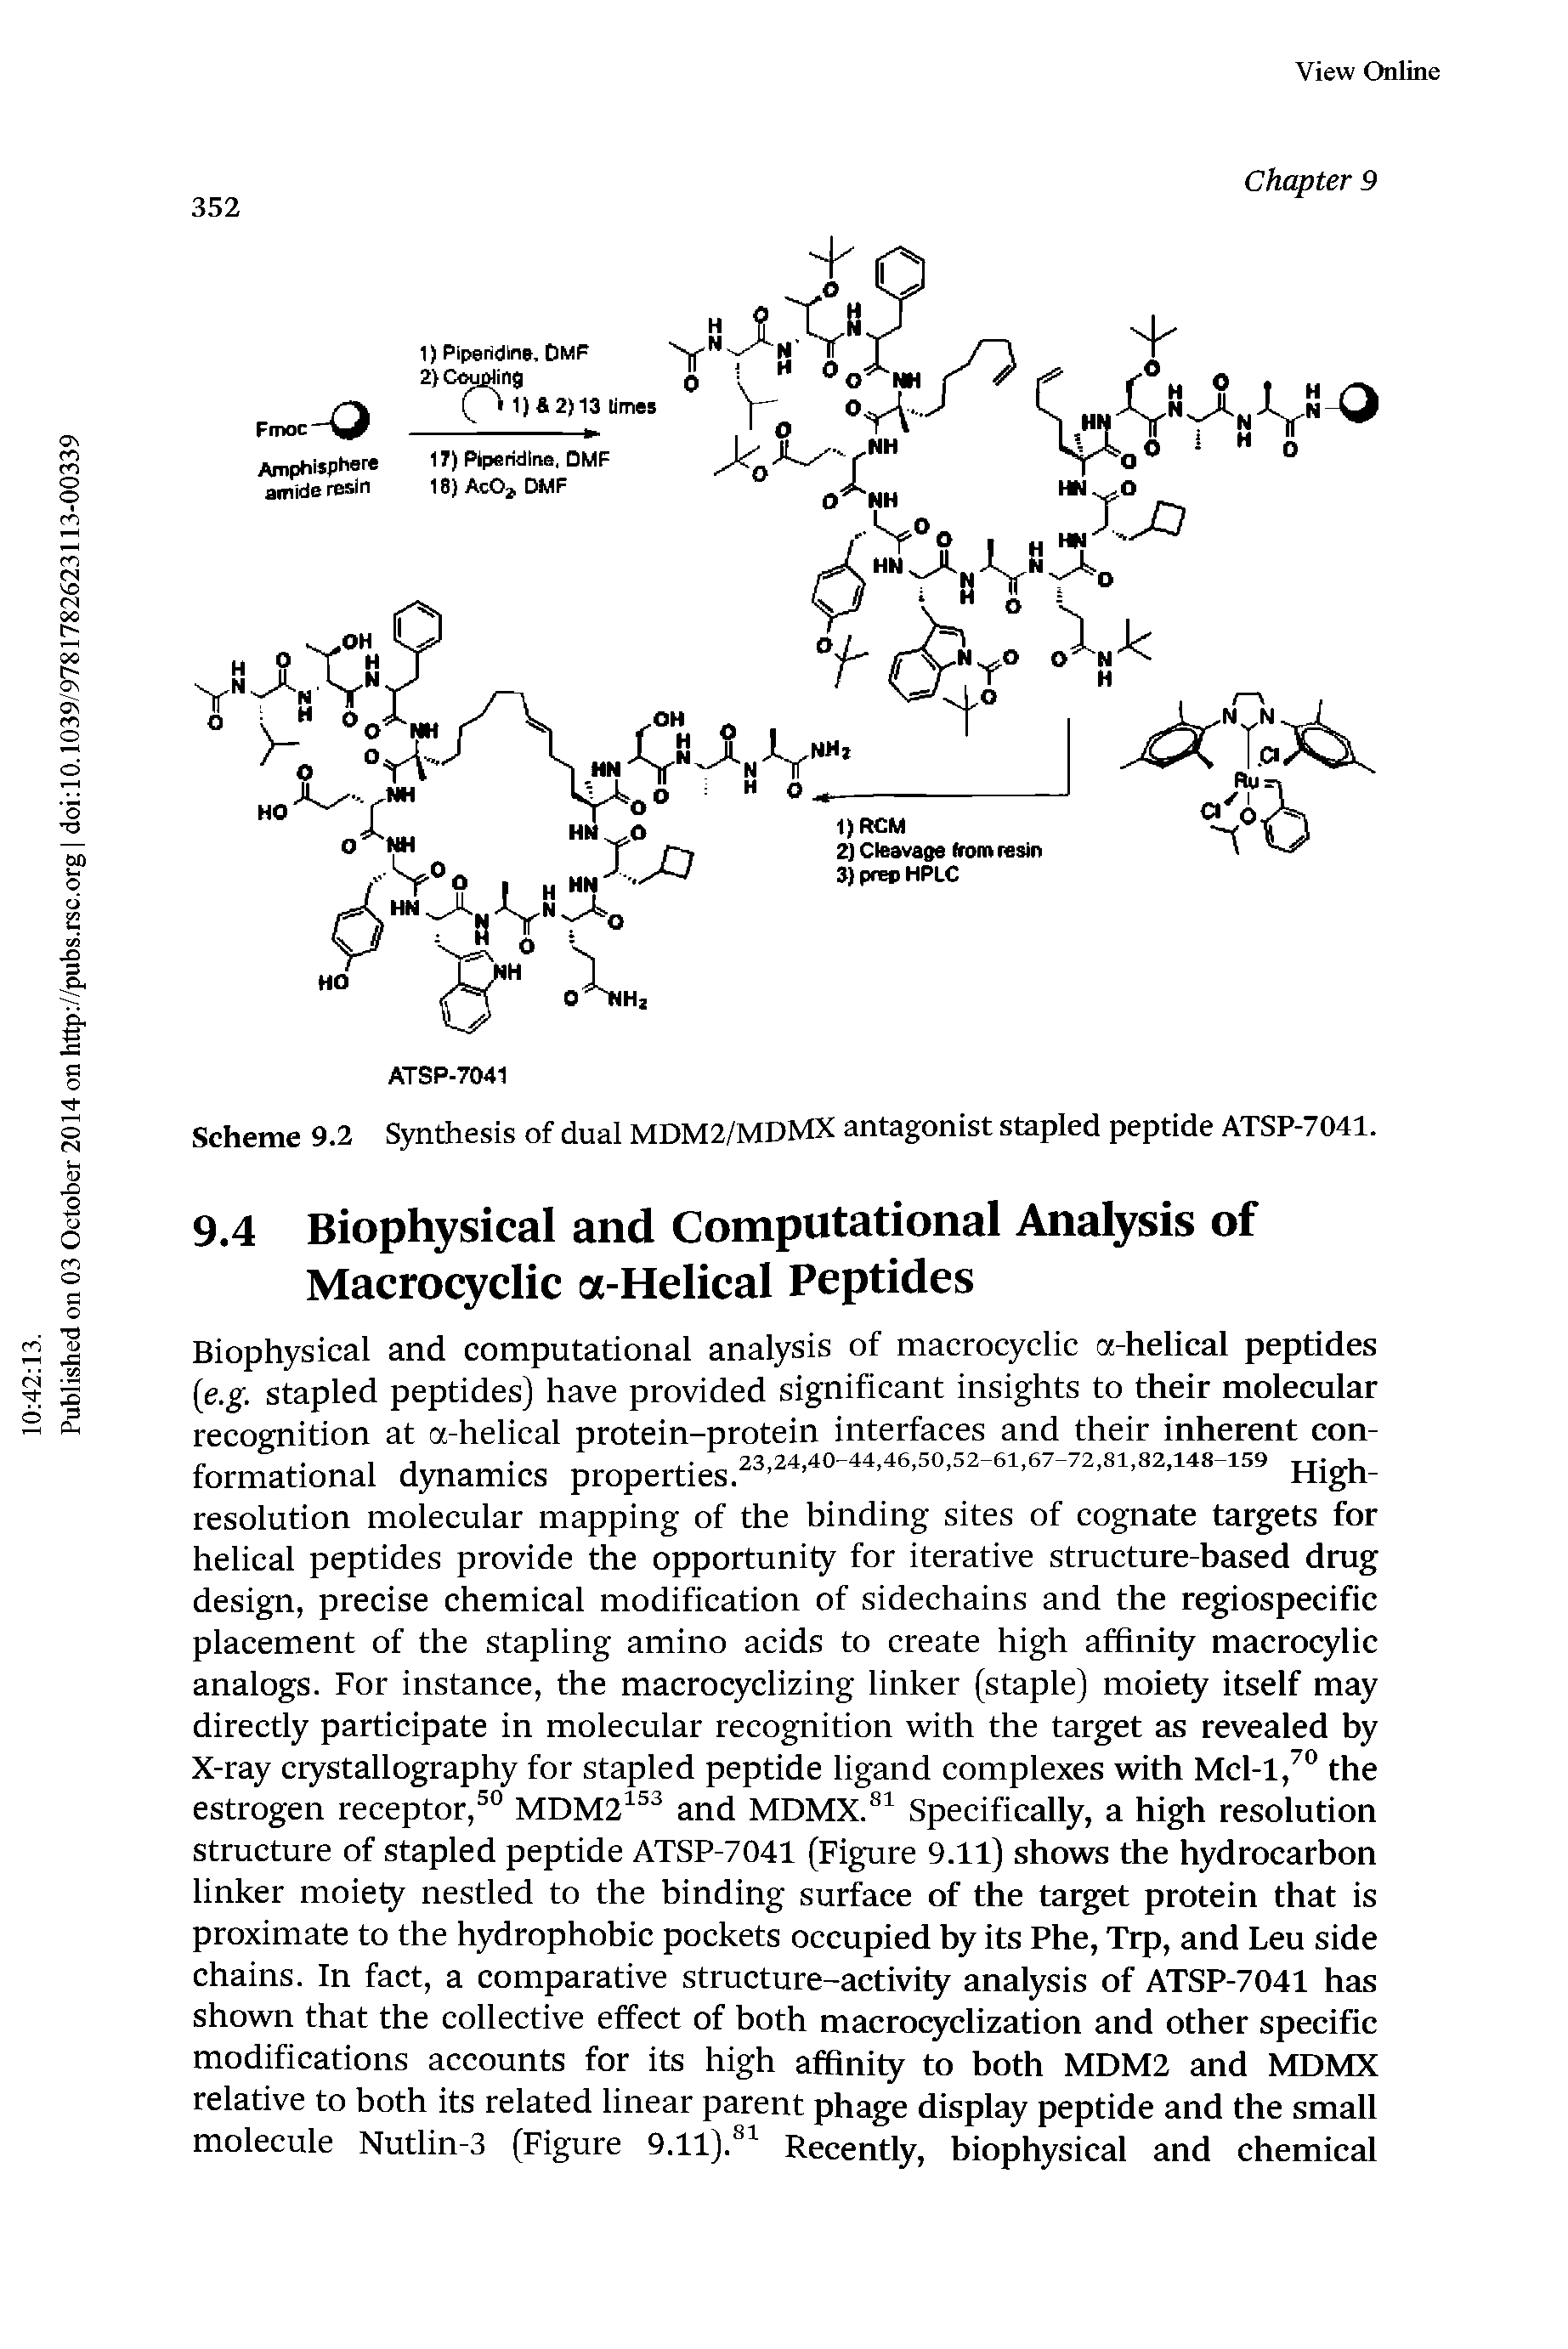 Scheme 9.2 Synthesis of dual MDM2/MDMX antagonist stapled peptide ATSP-7041.